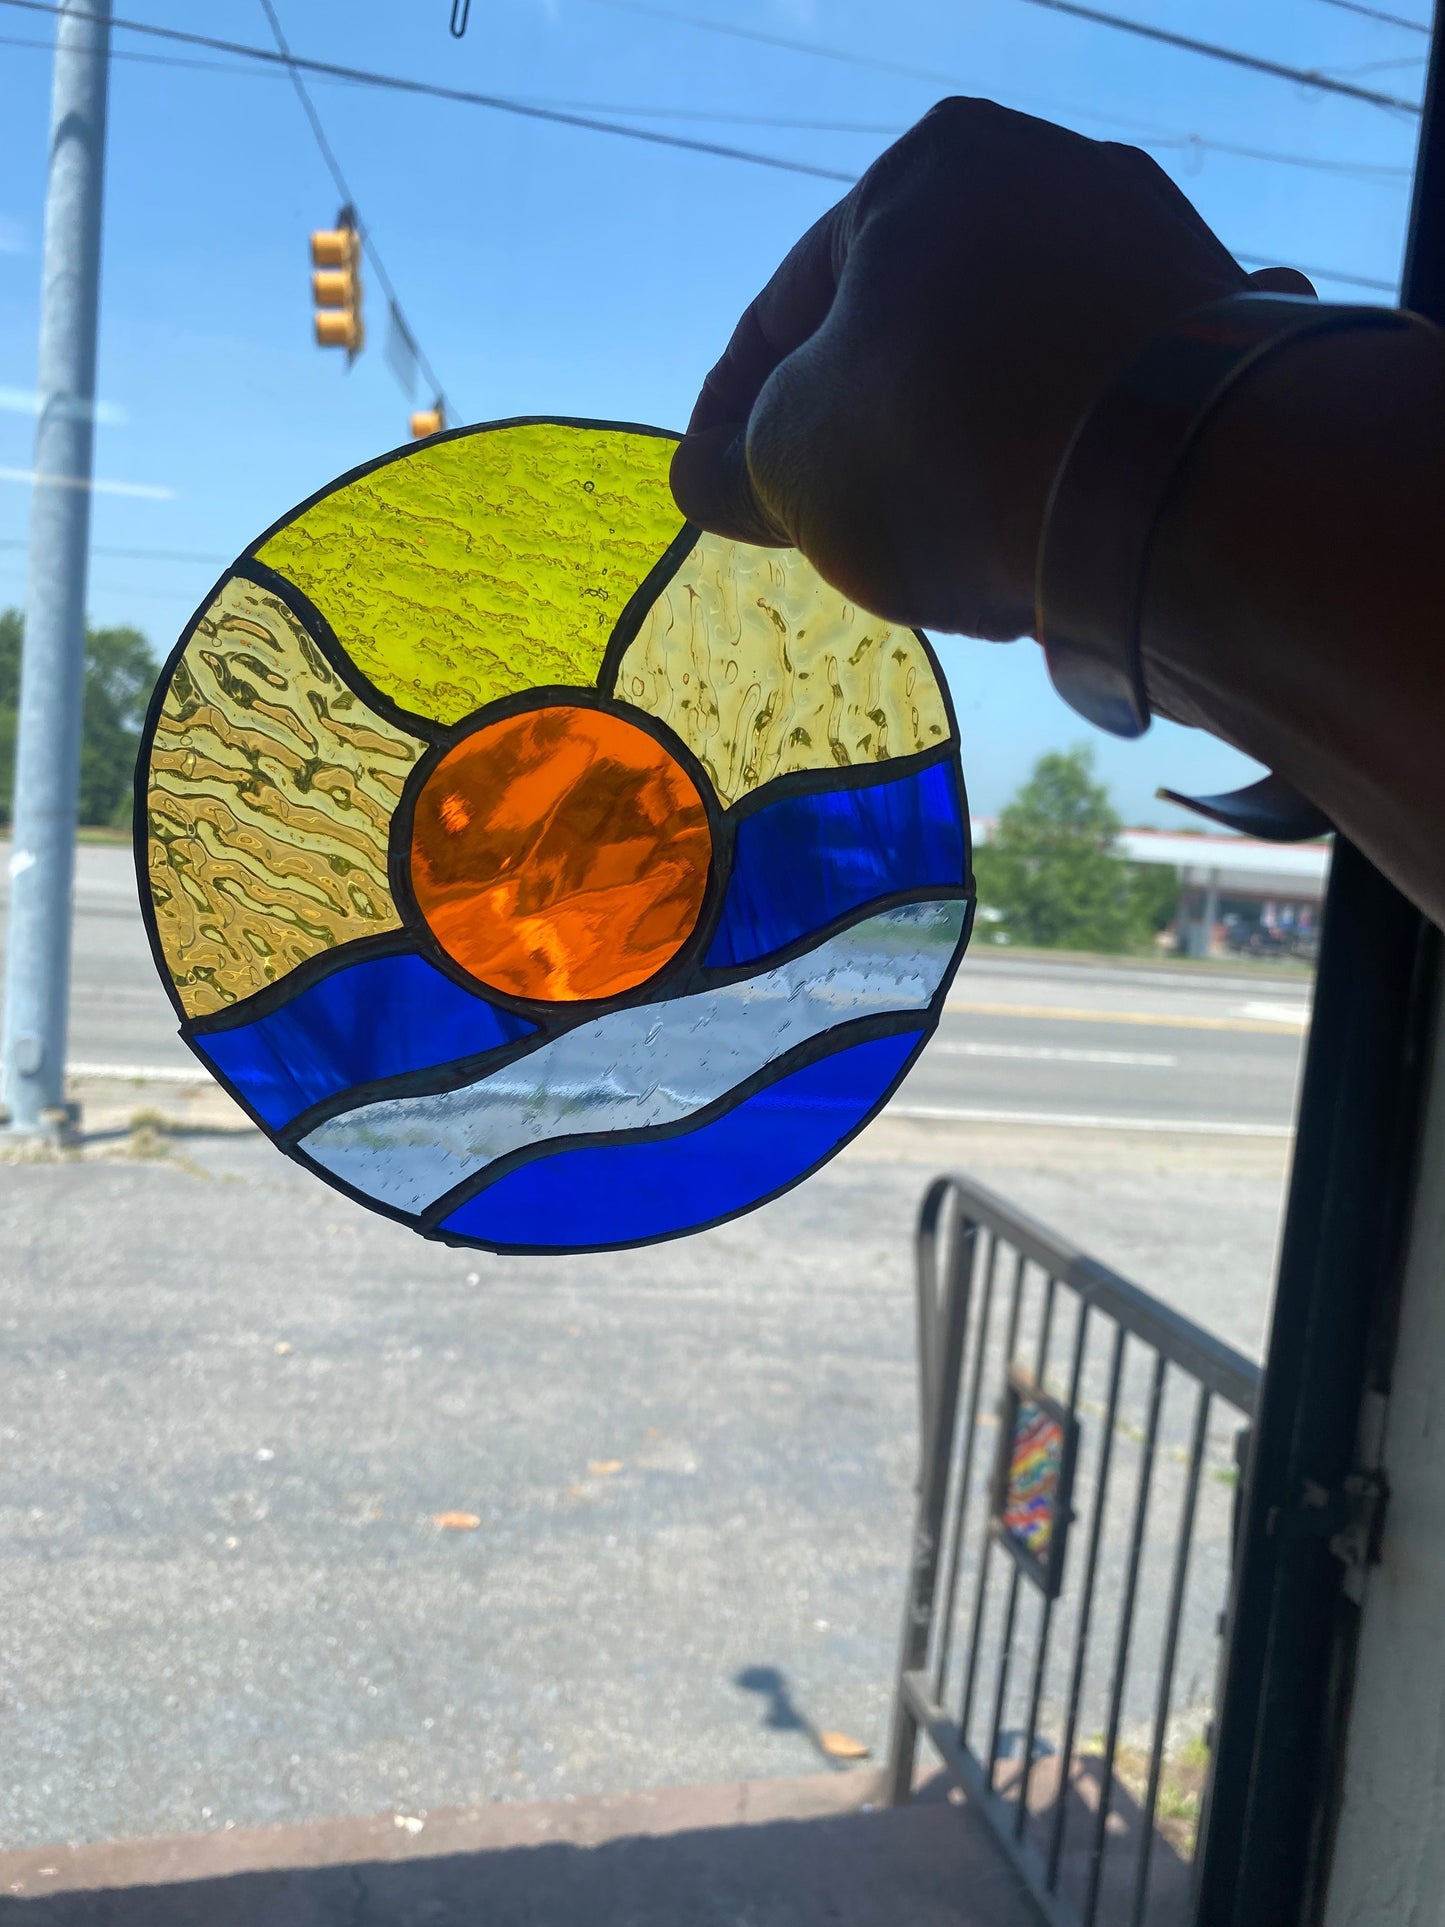 Beginner Stained Glass class, March 21, 4-6:30 pm